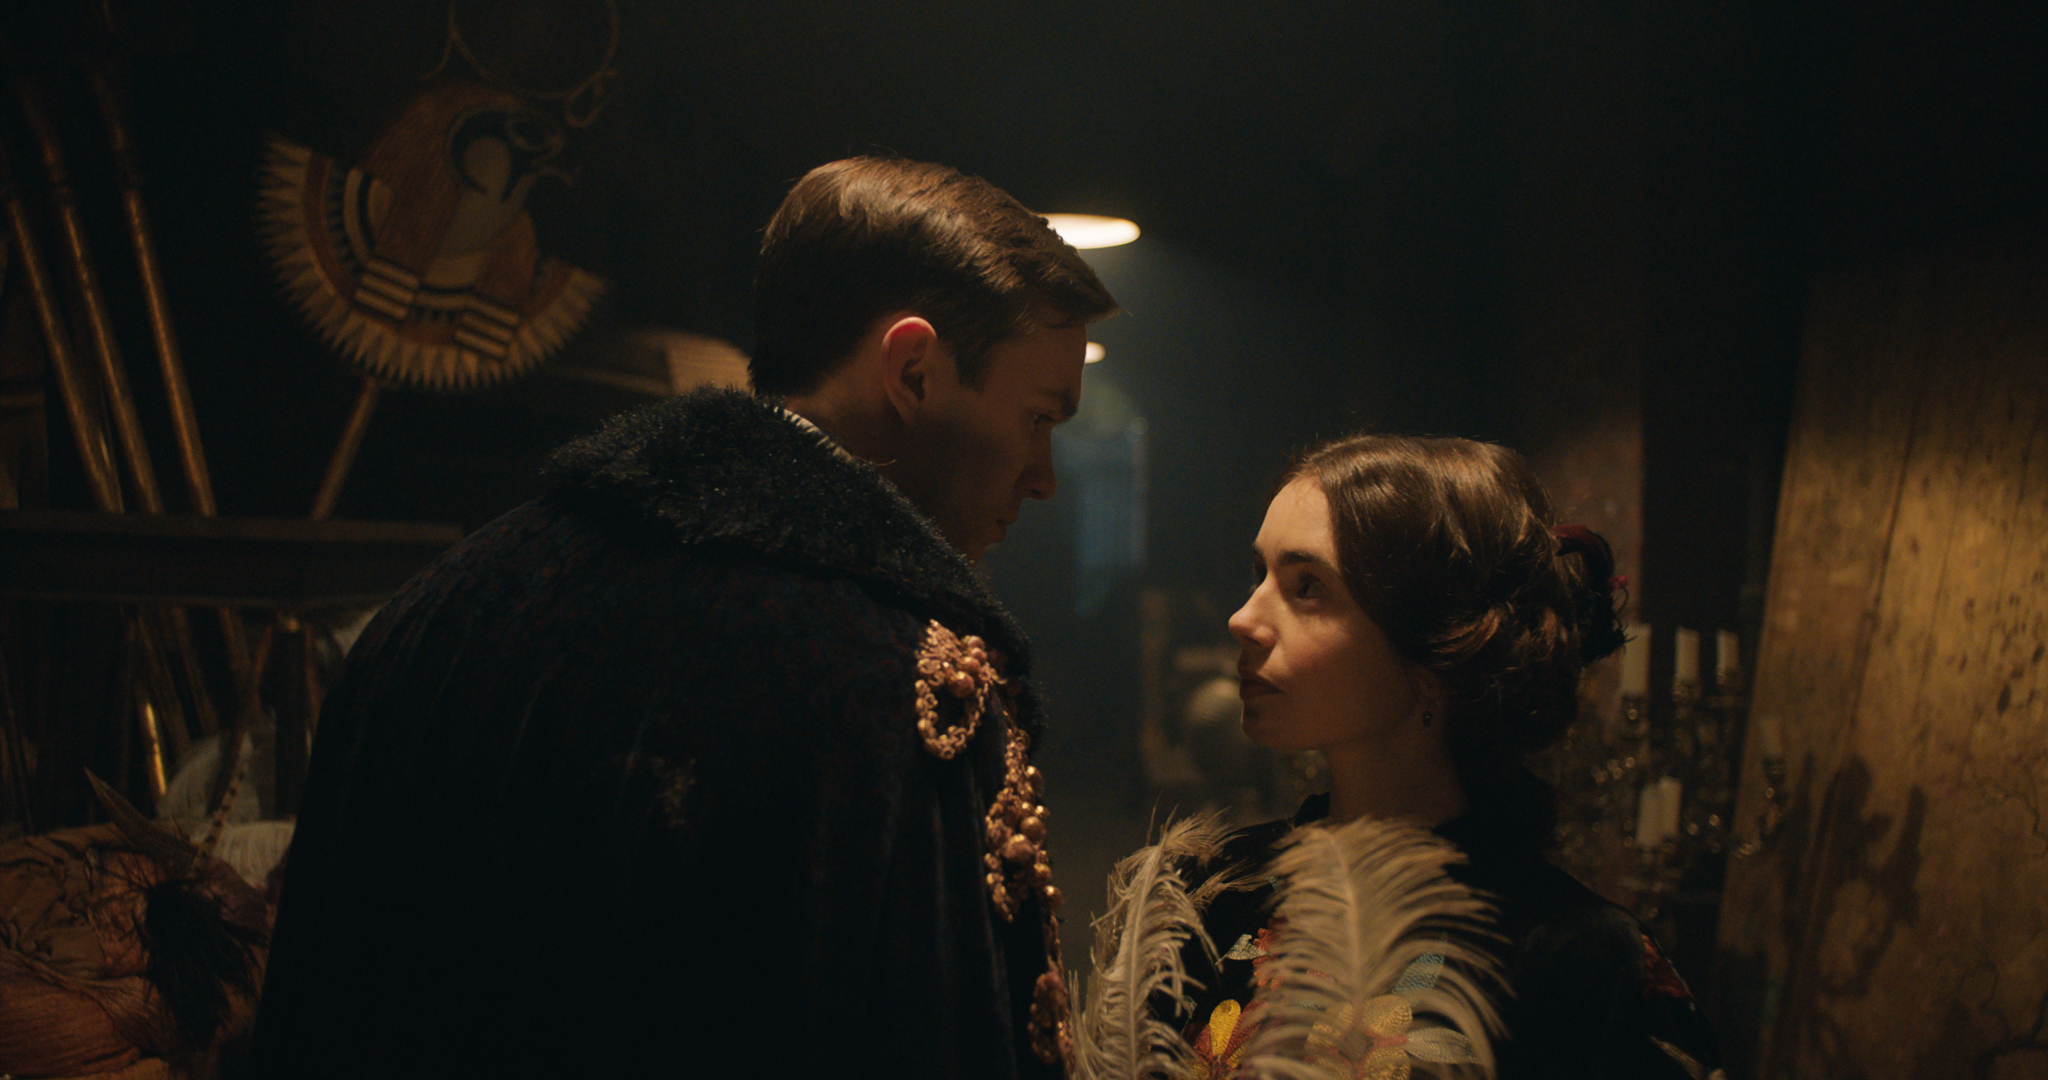 Nicholas Hoult and Lily Collins in the film 'Tolkien.' © 2019 Twentieth Century Fox Film Corporation All Rights Reserved (Fox Searchlight Pictures.)